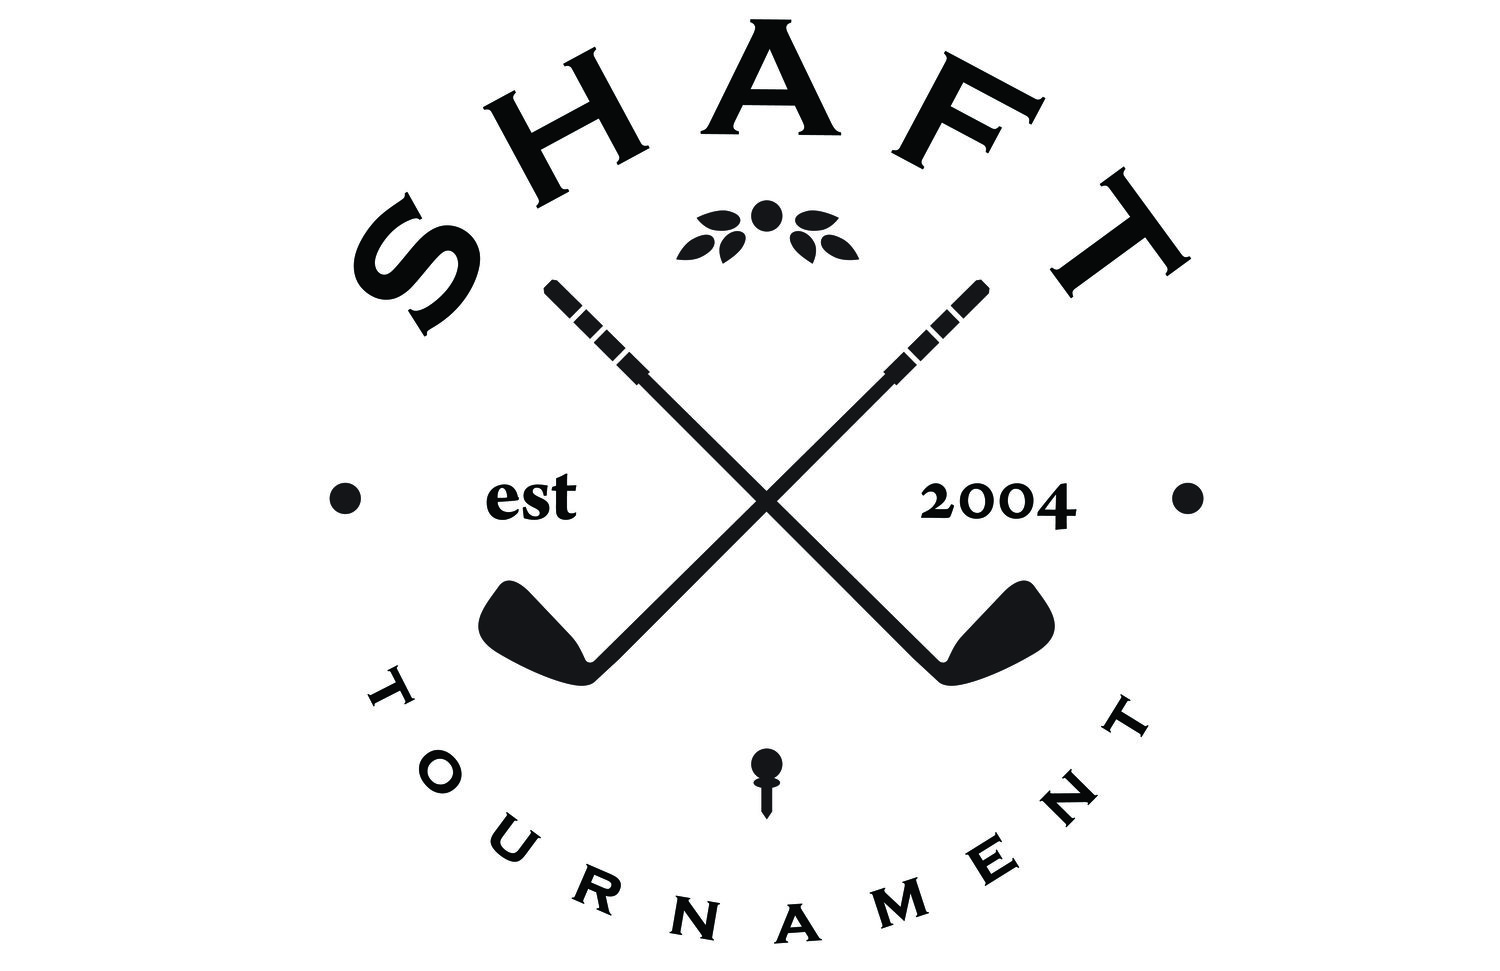 The Shaft Charity Golf Tournament